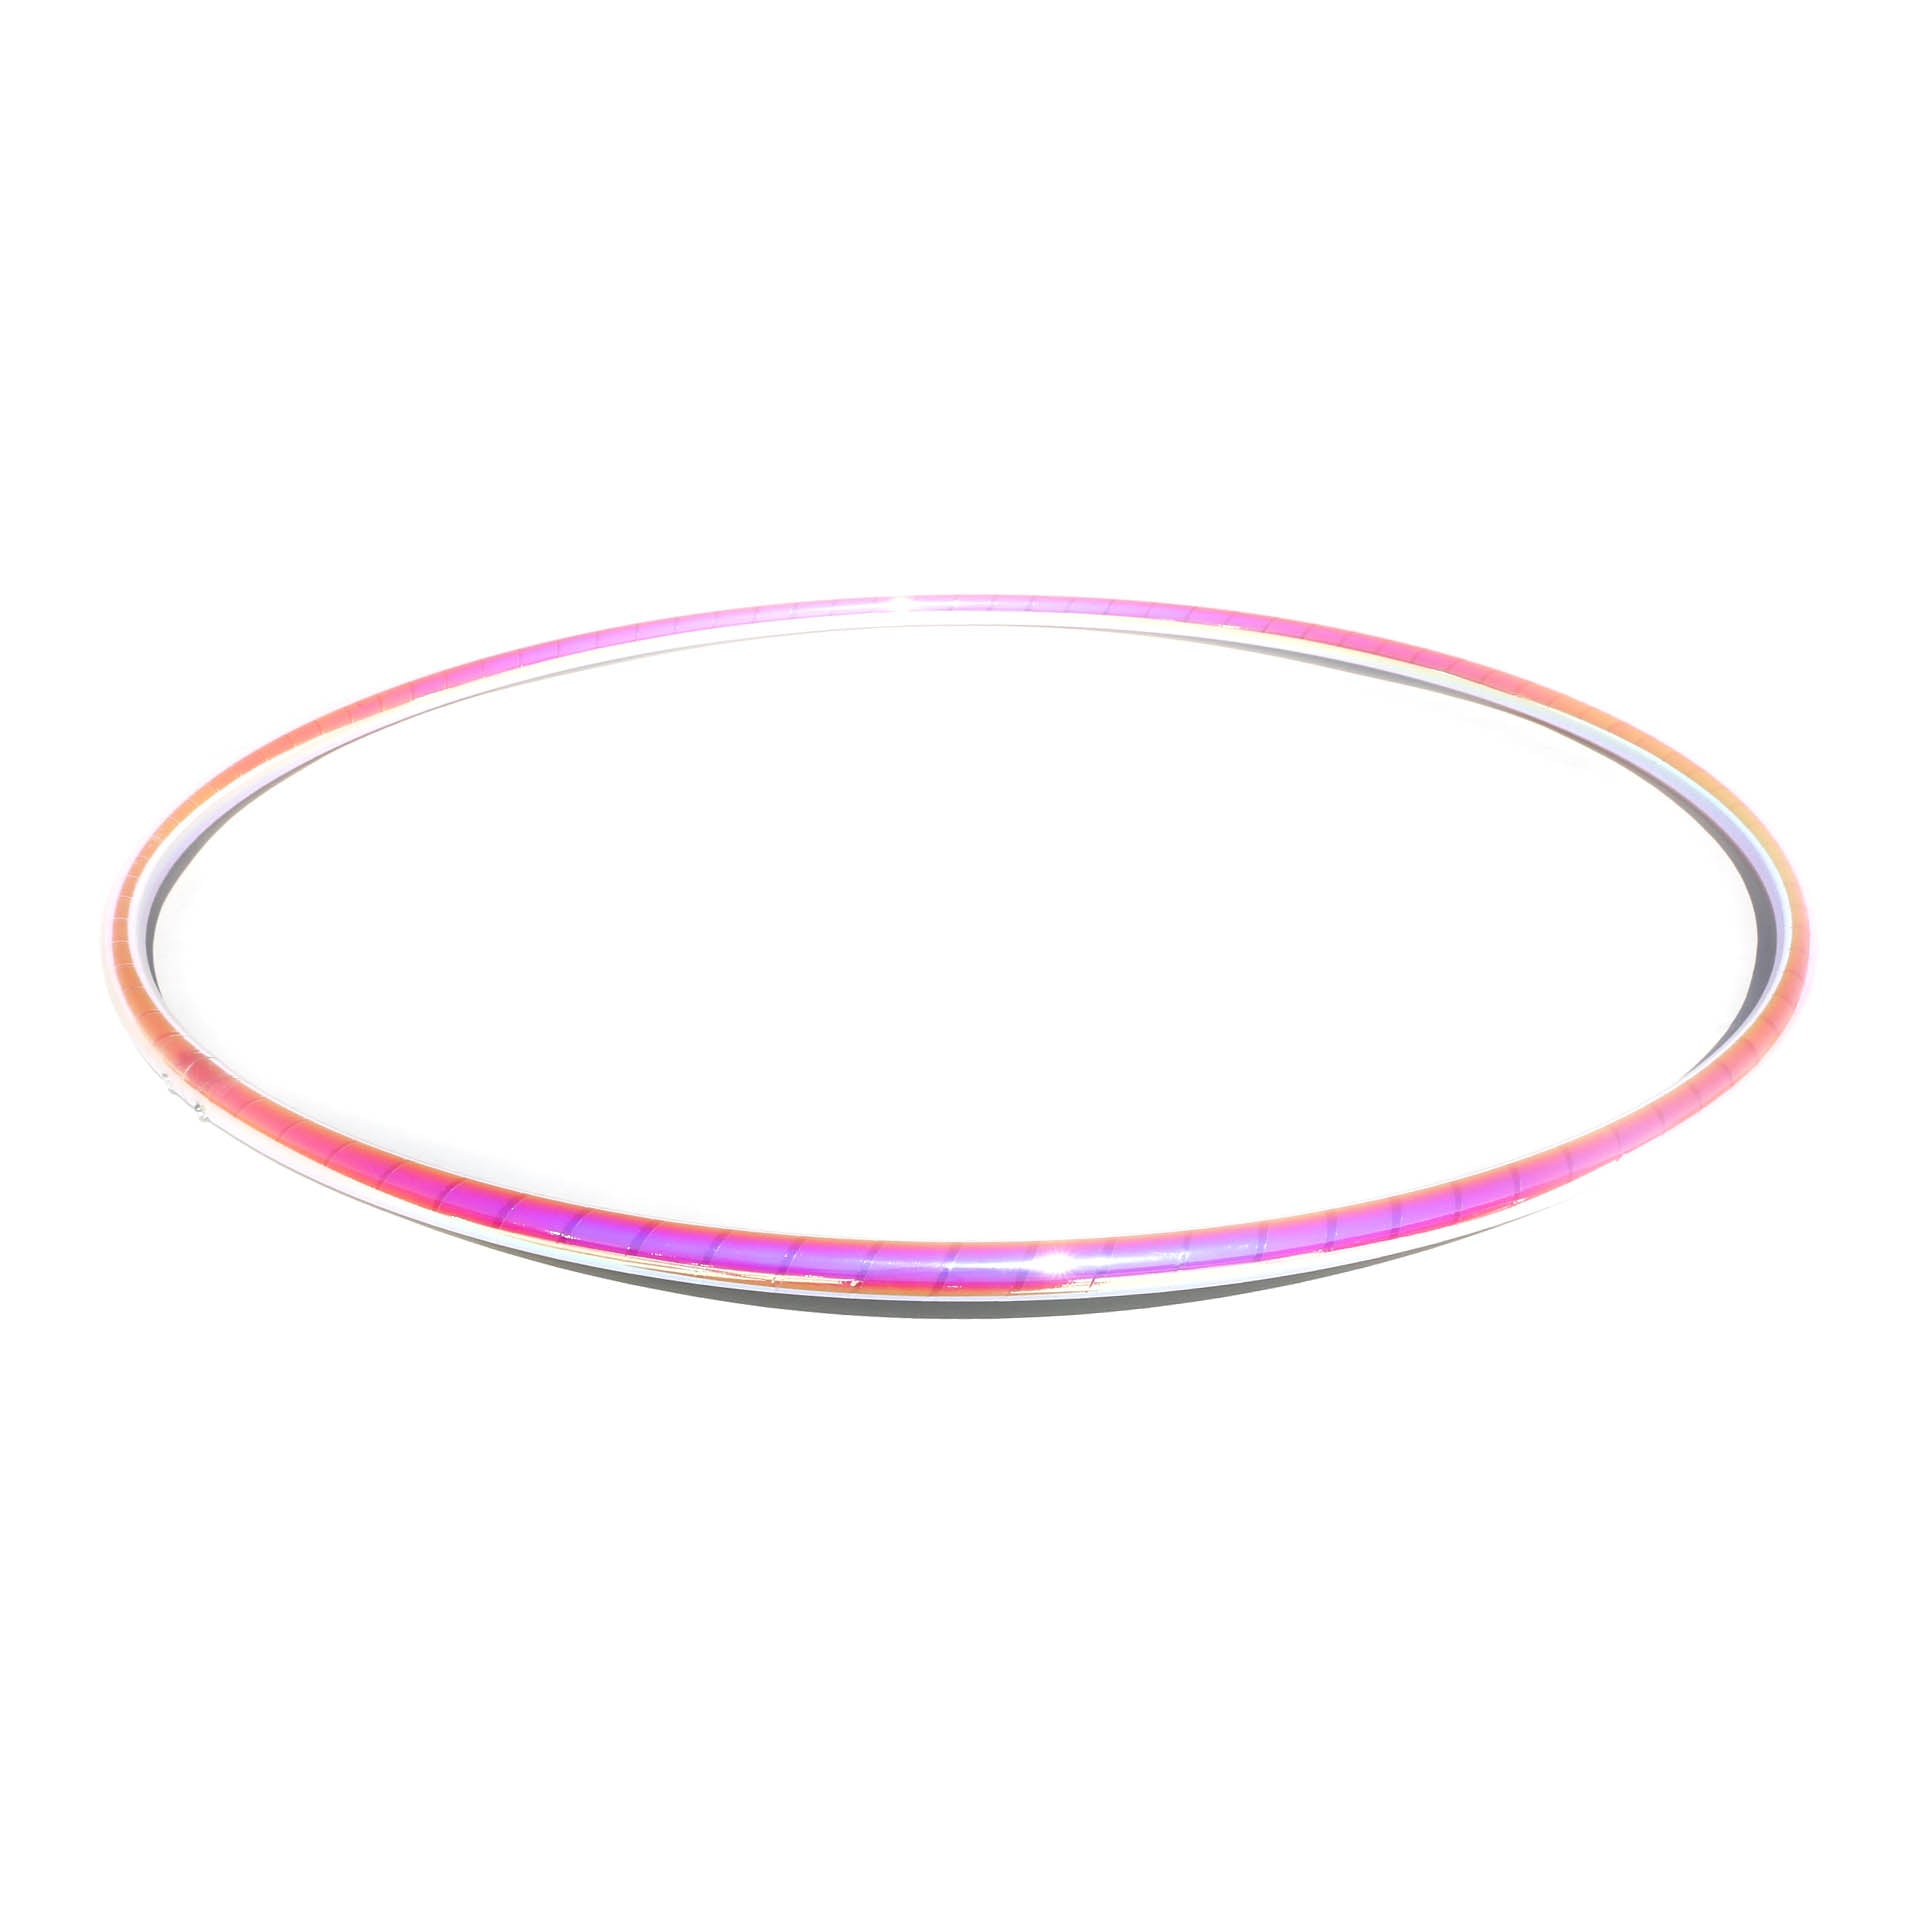 Whipped Cream Polypro Hula Hoop – The Spinsterz